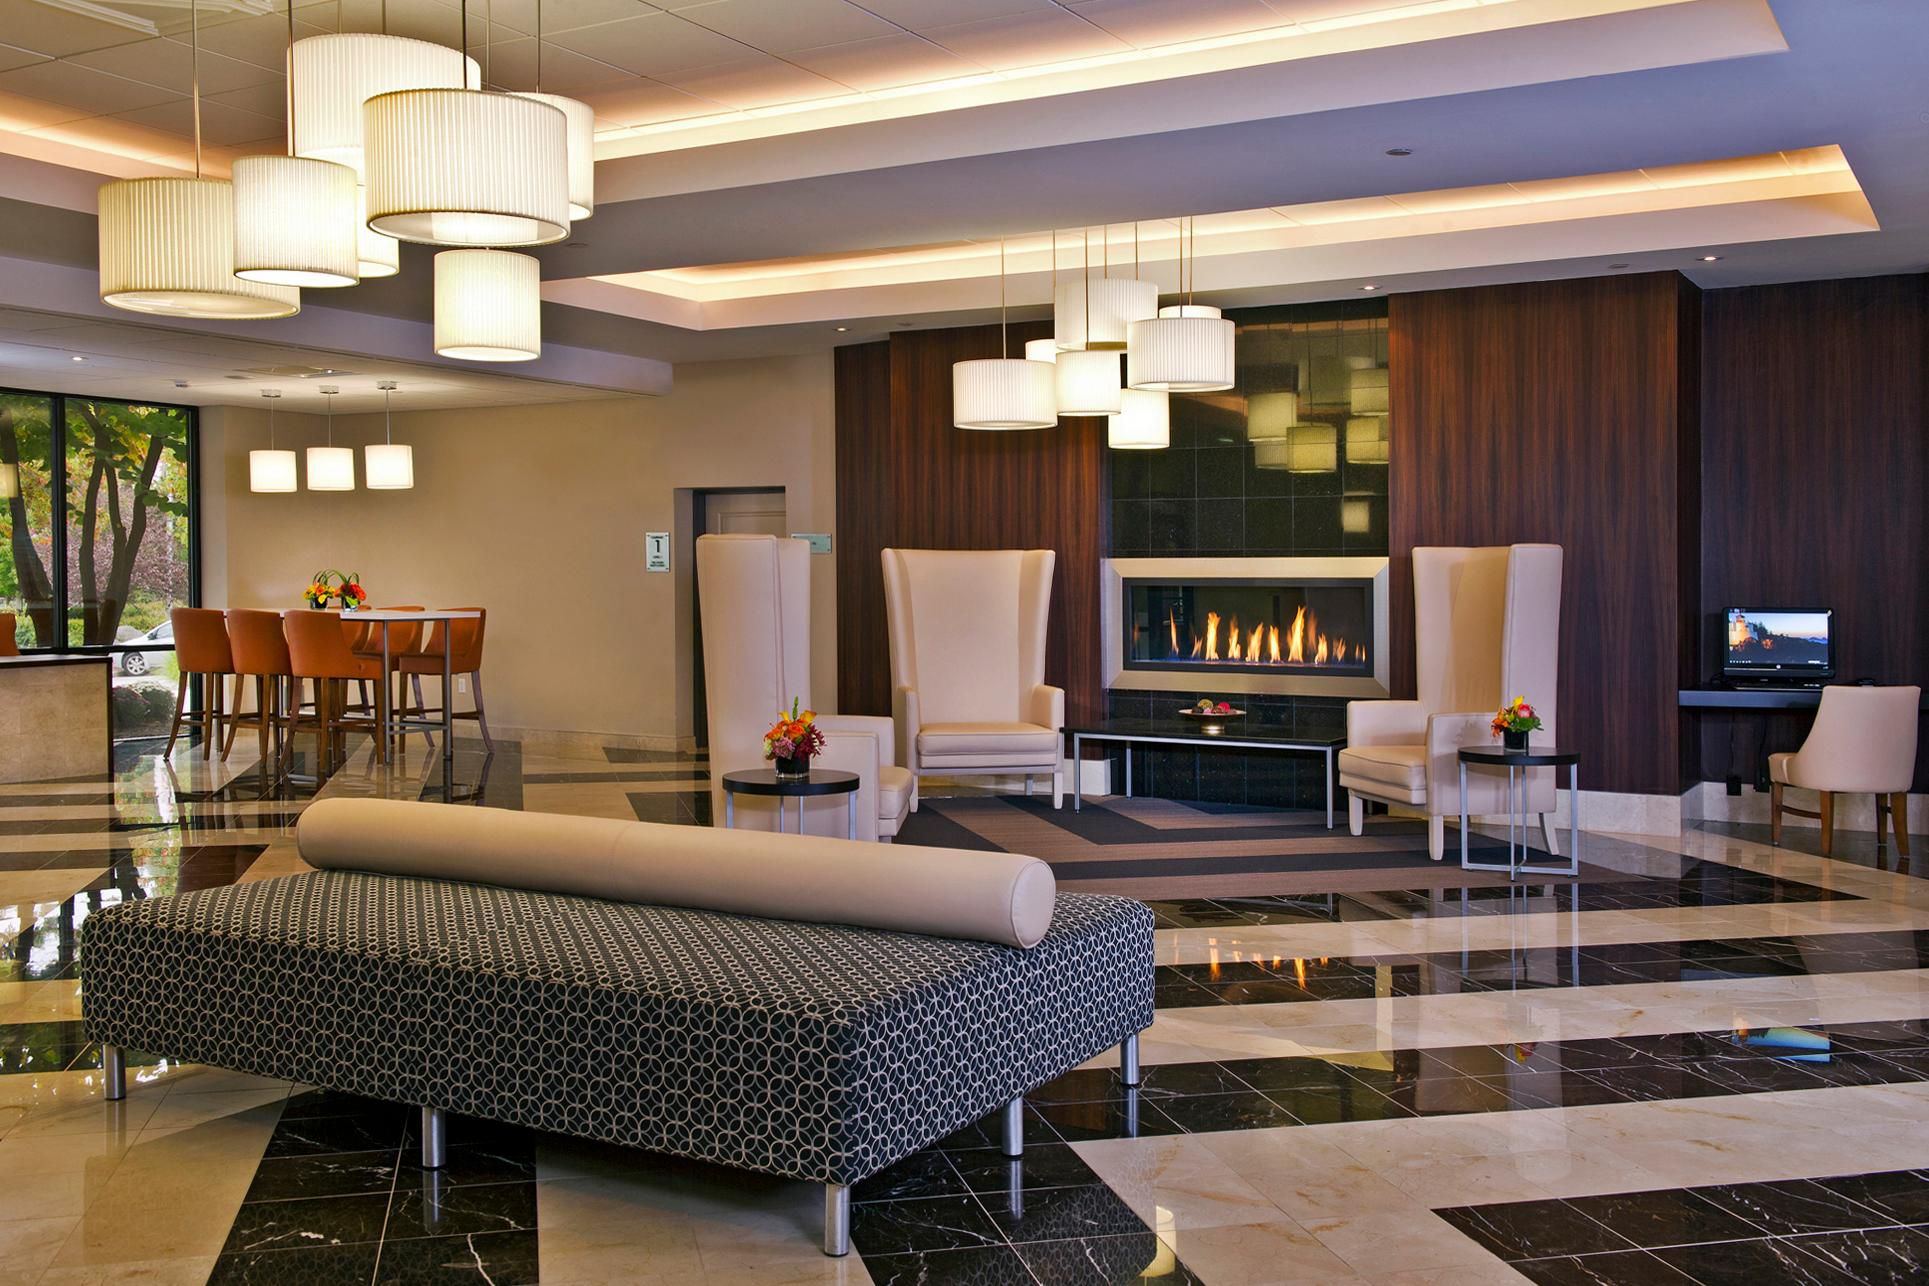 Enjoy and relax in the hotel lobby with free Wi-Fi.